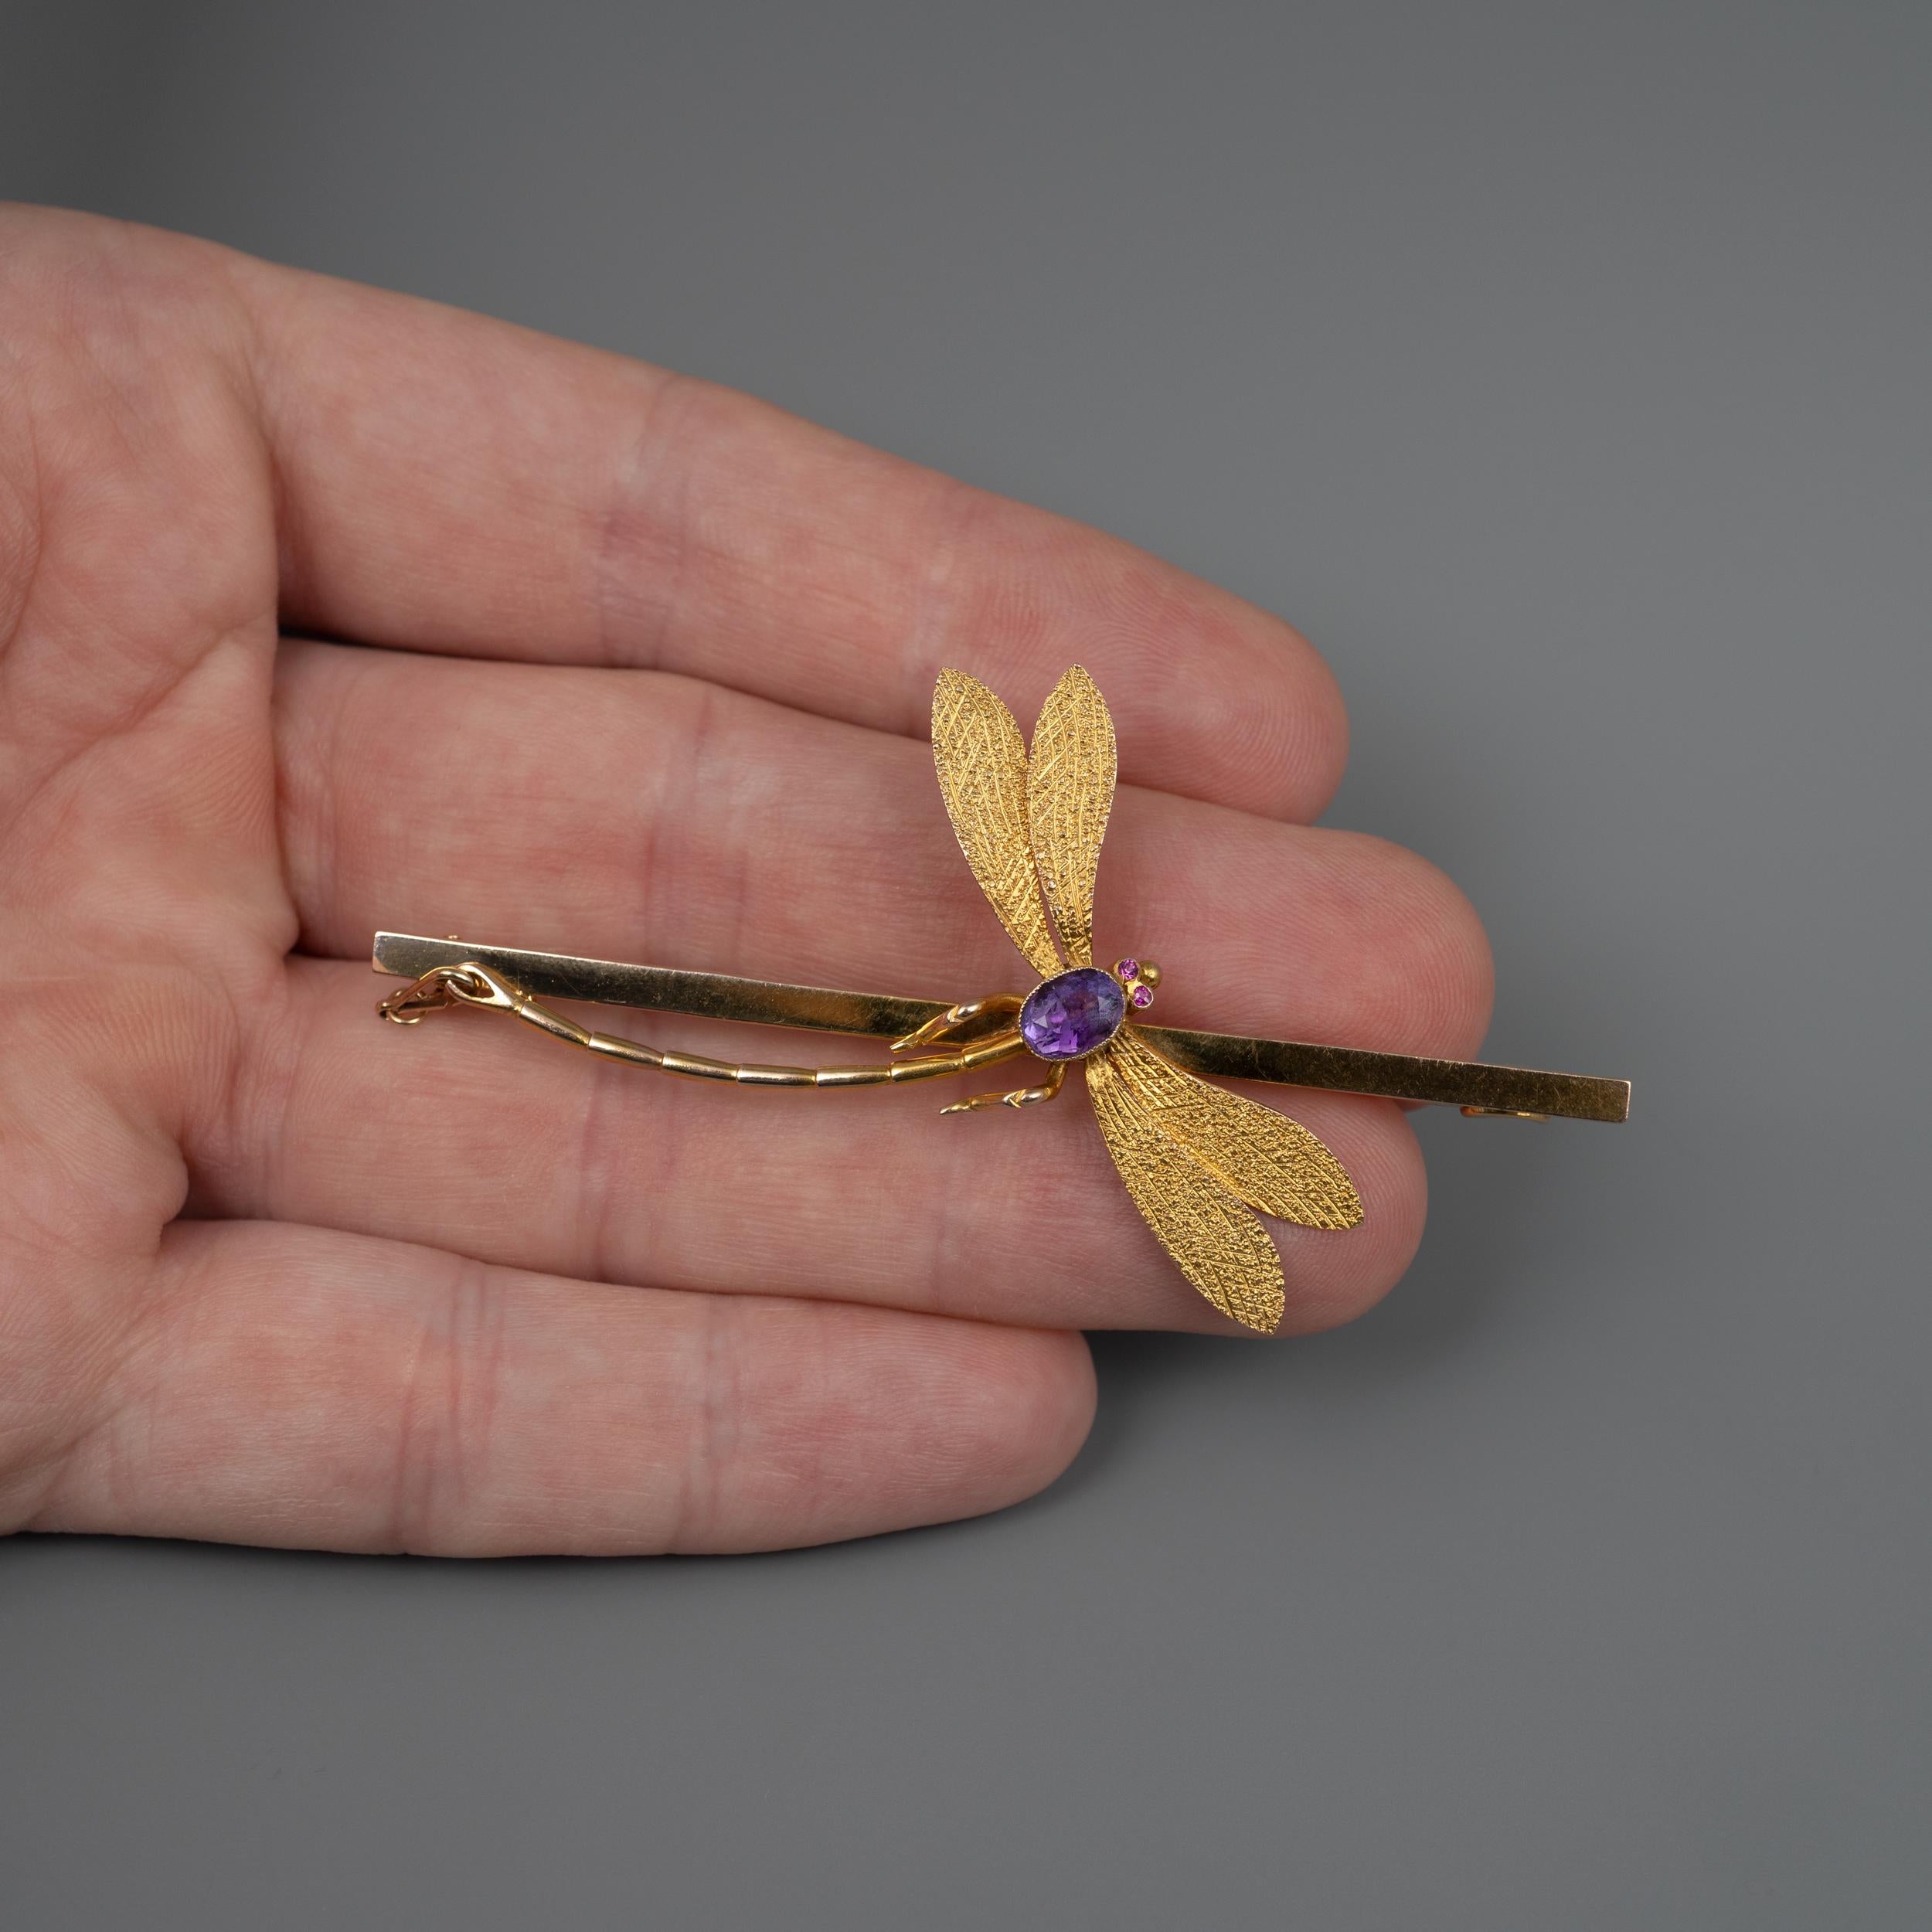 This outstanding Dragonfly brooch pin, set with amethyst and rubies is beautifully crafted in 9 karat yellow gold. The dragonfly is nicely positioned onto a squared bar and features textured finish to the double wings. The gold pin slots neatly into